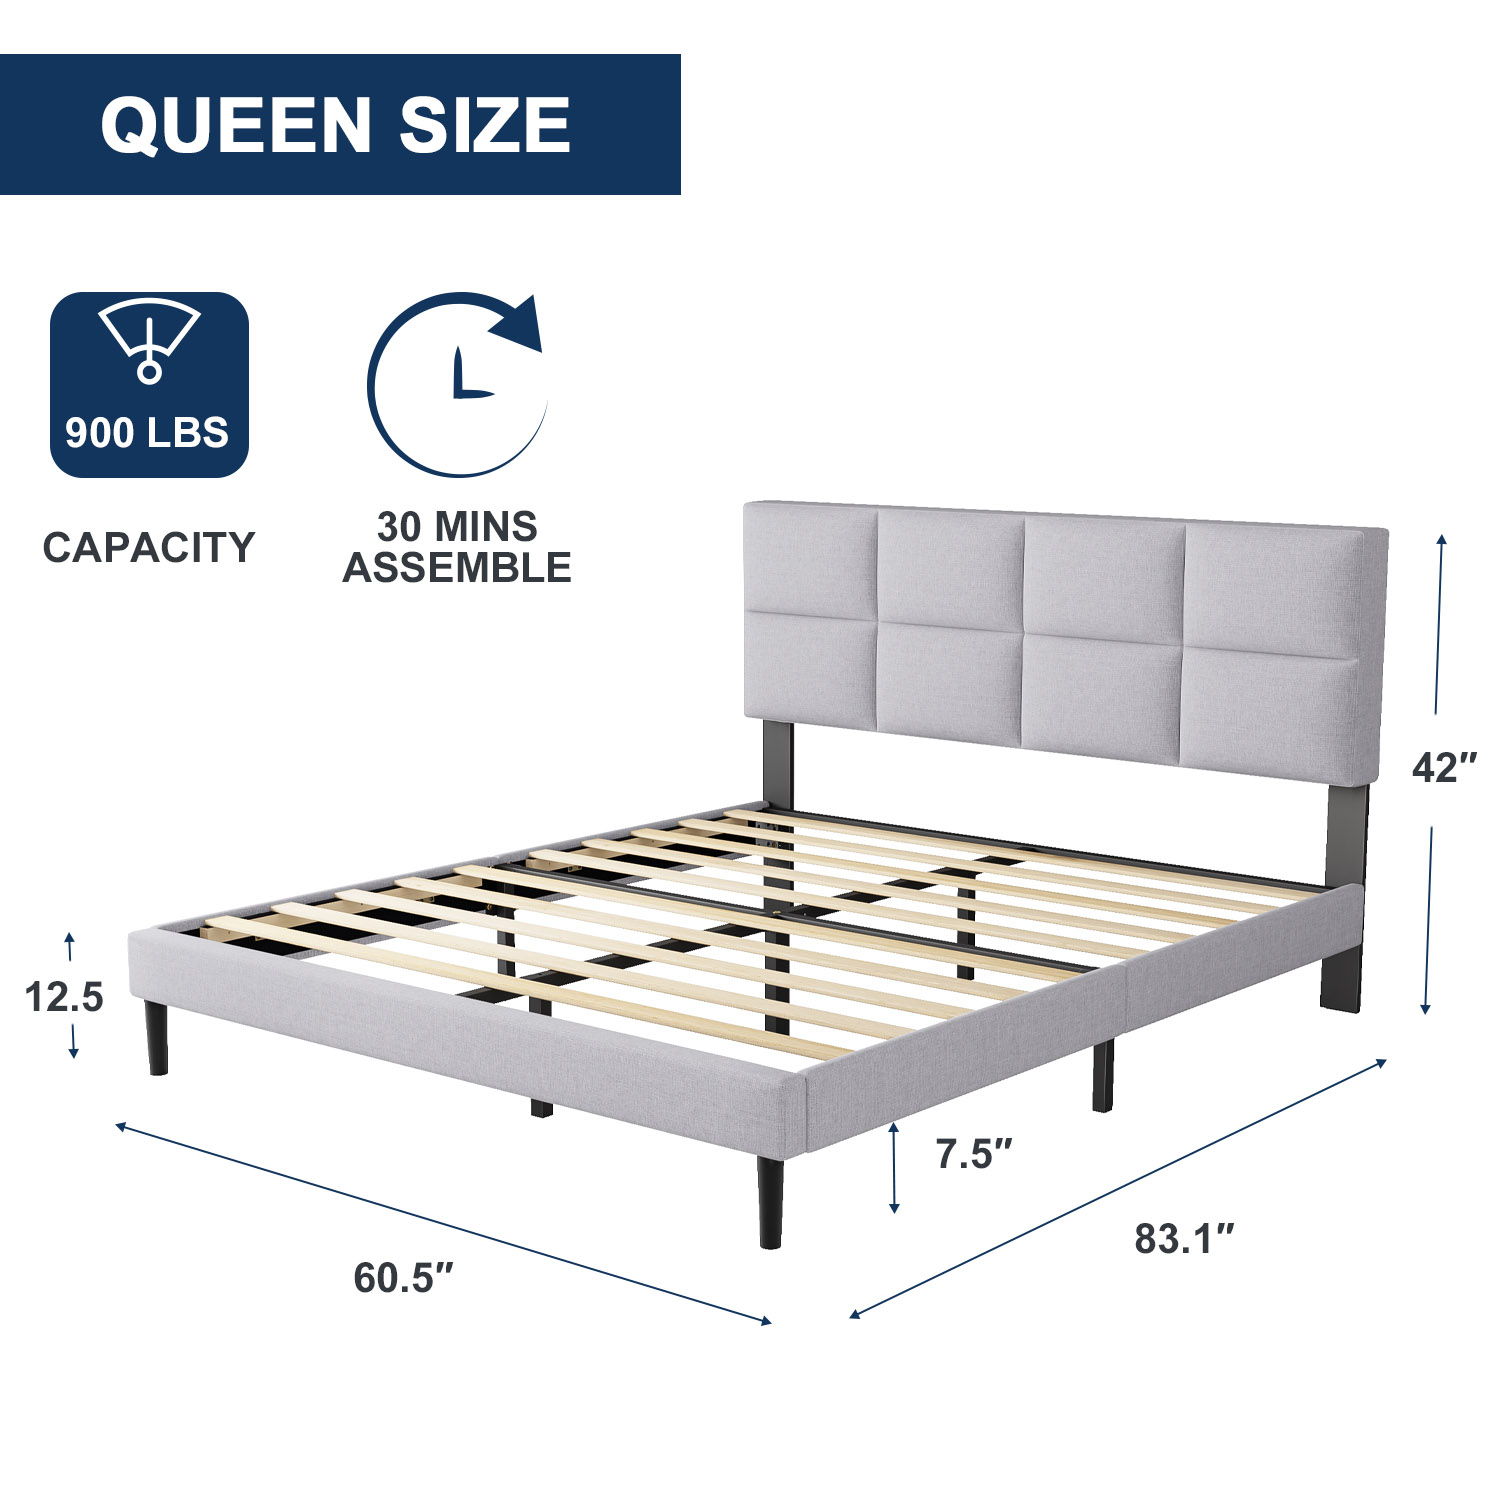 HAIIDE Queen Size bed Frame with Fabric Upholstered Headboard,light Gray, Easy Assembly - image 2 of 6